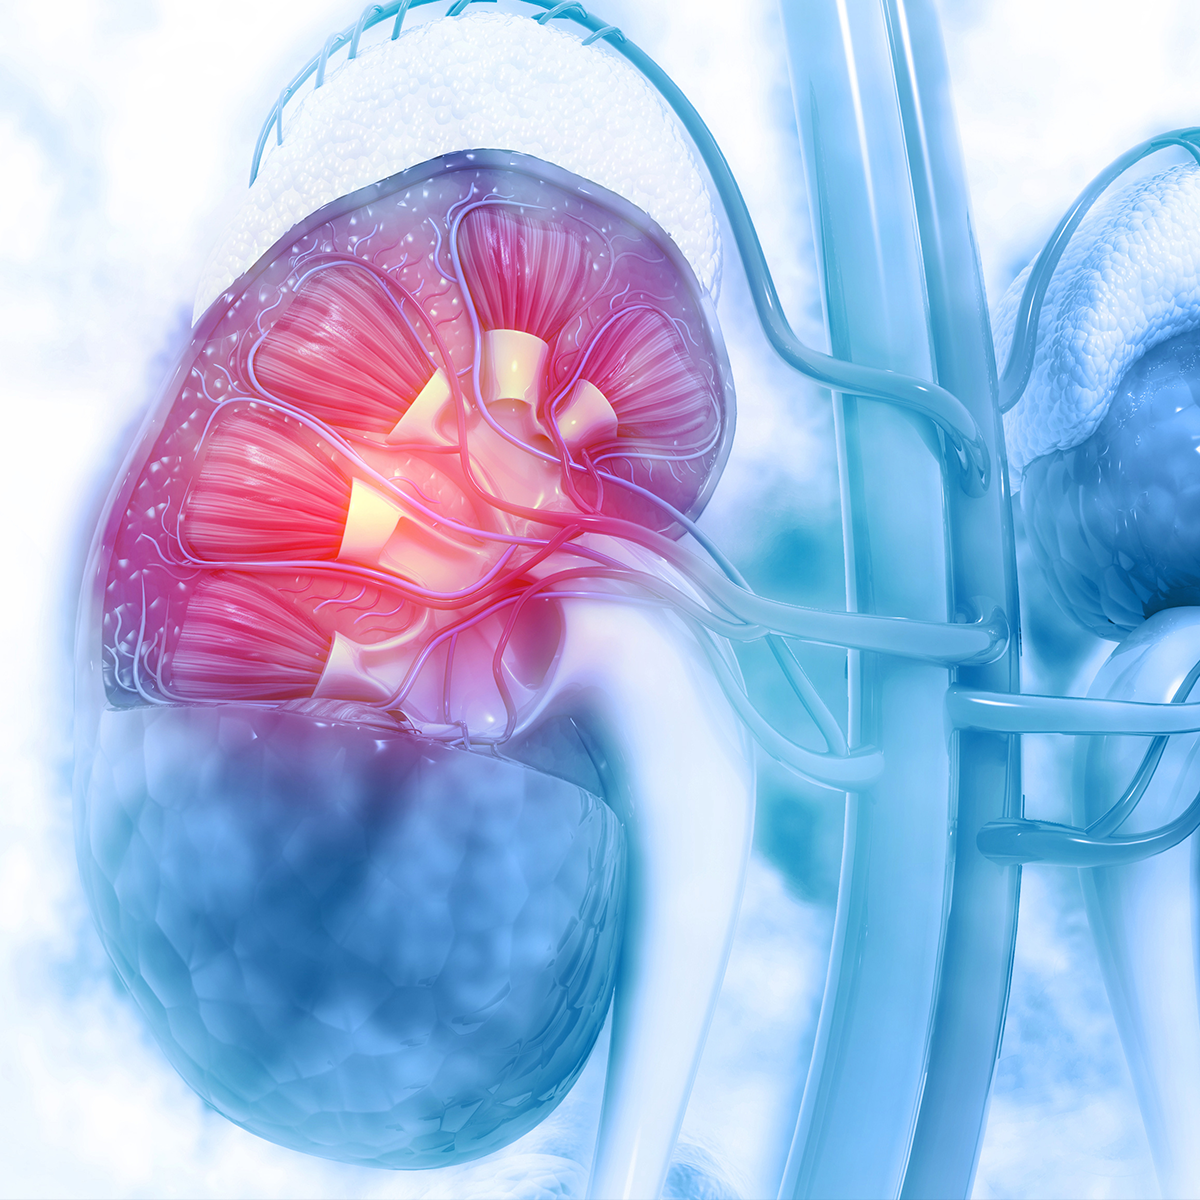 Neoadjuvant Axitinib Effective in Subgroup of Patients with Renal Cell Carcinoma